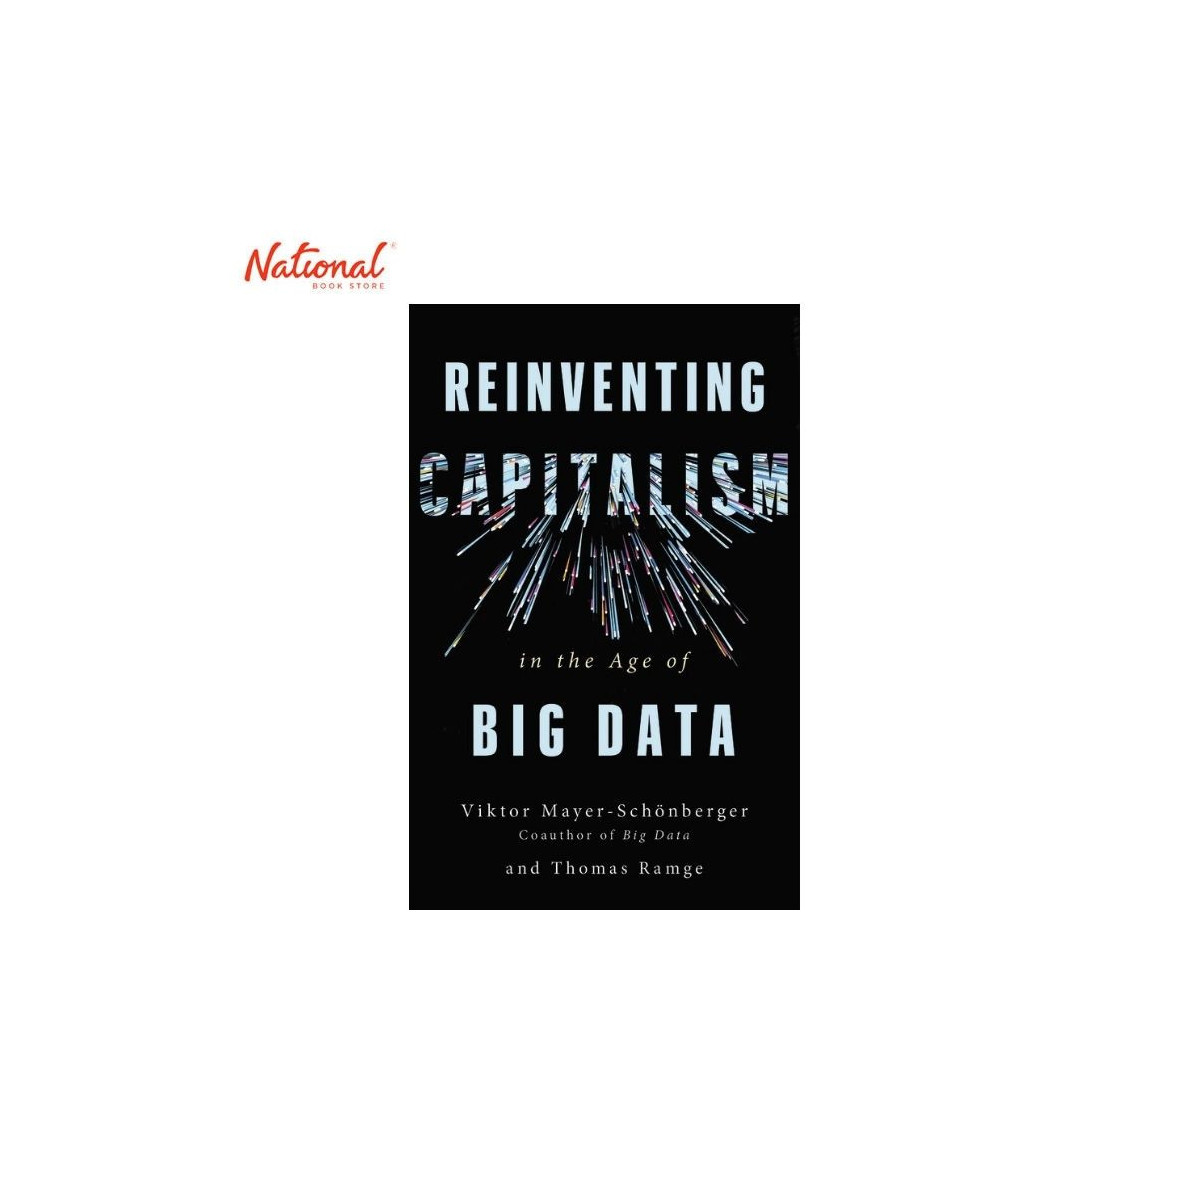 Reinventing Capitalism in the Age of Big Data Hardcover by Viktor Mayer-Schönberger